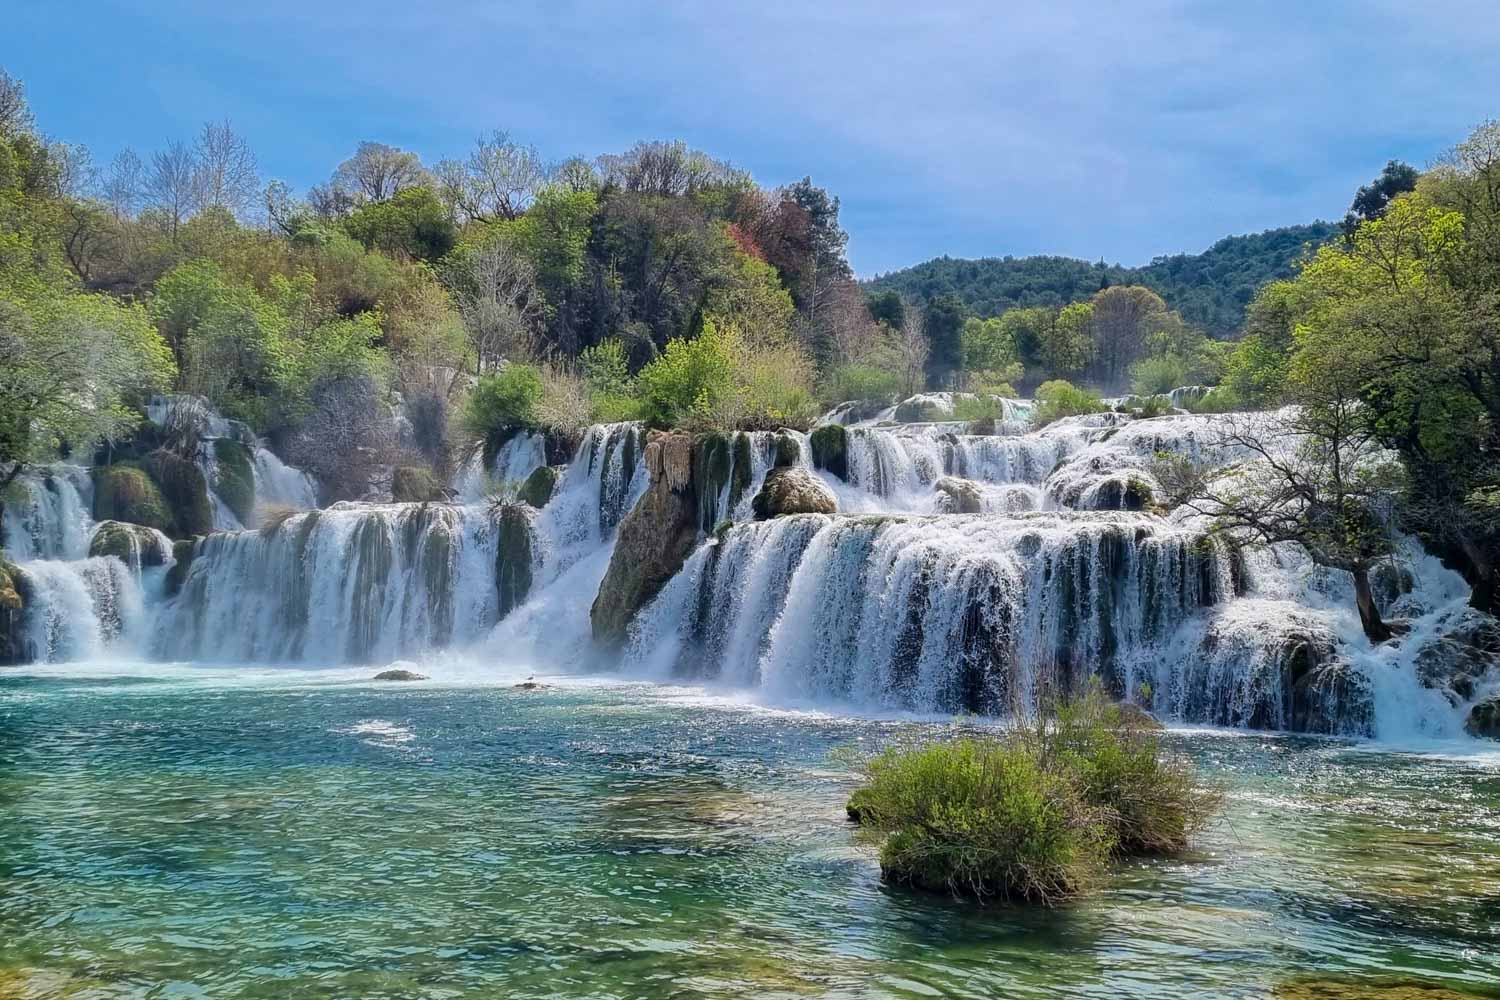 Skradinski Buk, one of the most famous waterfalls to spot during a day at Croatia's Krka National Park with kids